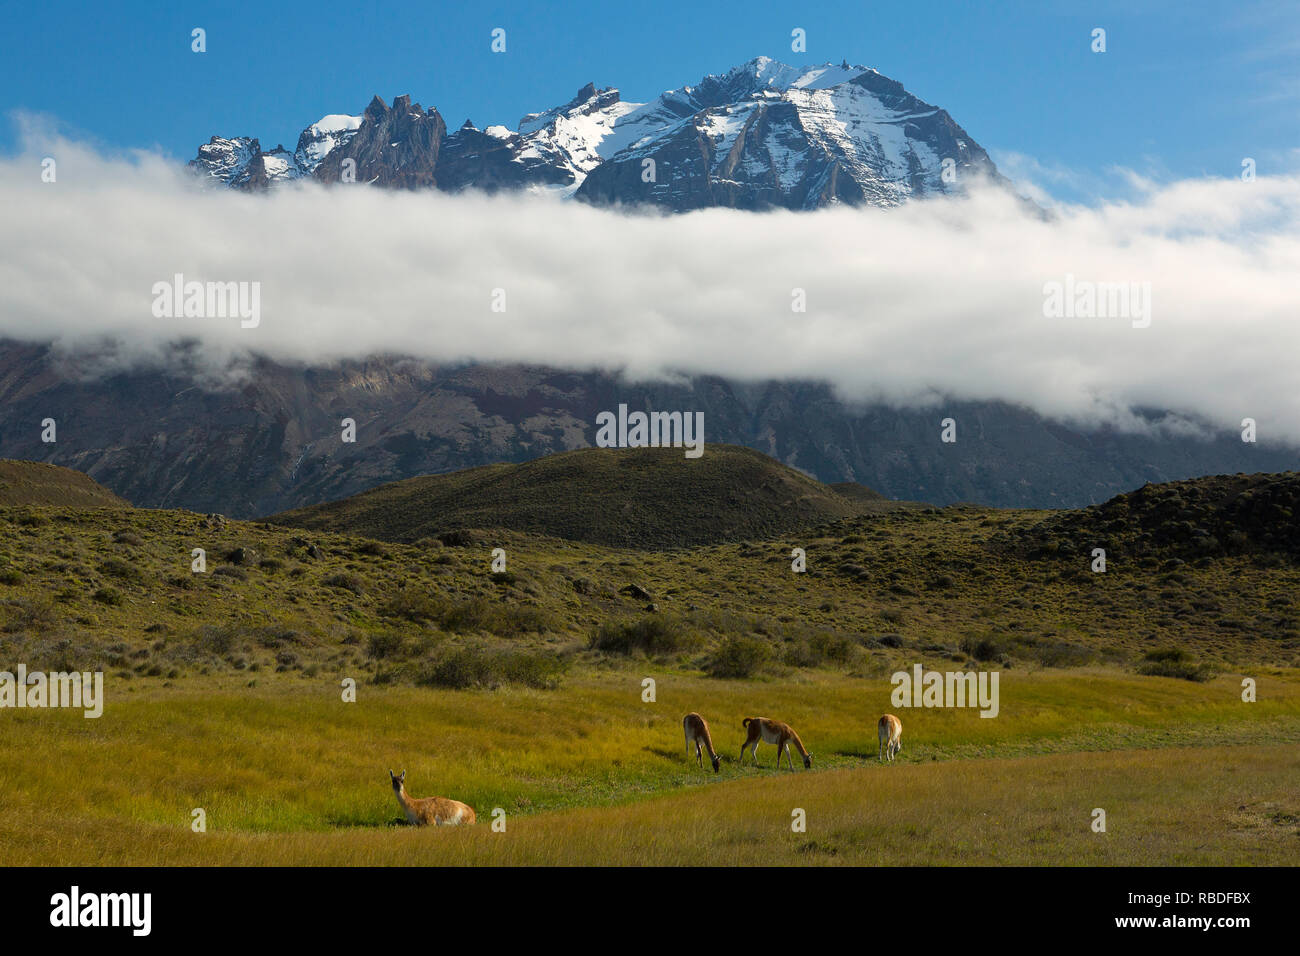 A herd of Guanaco (Lama guanicoe) in Torres Del Paine National Park of Chile. Wild Stock Photo